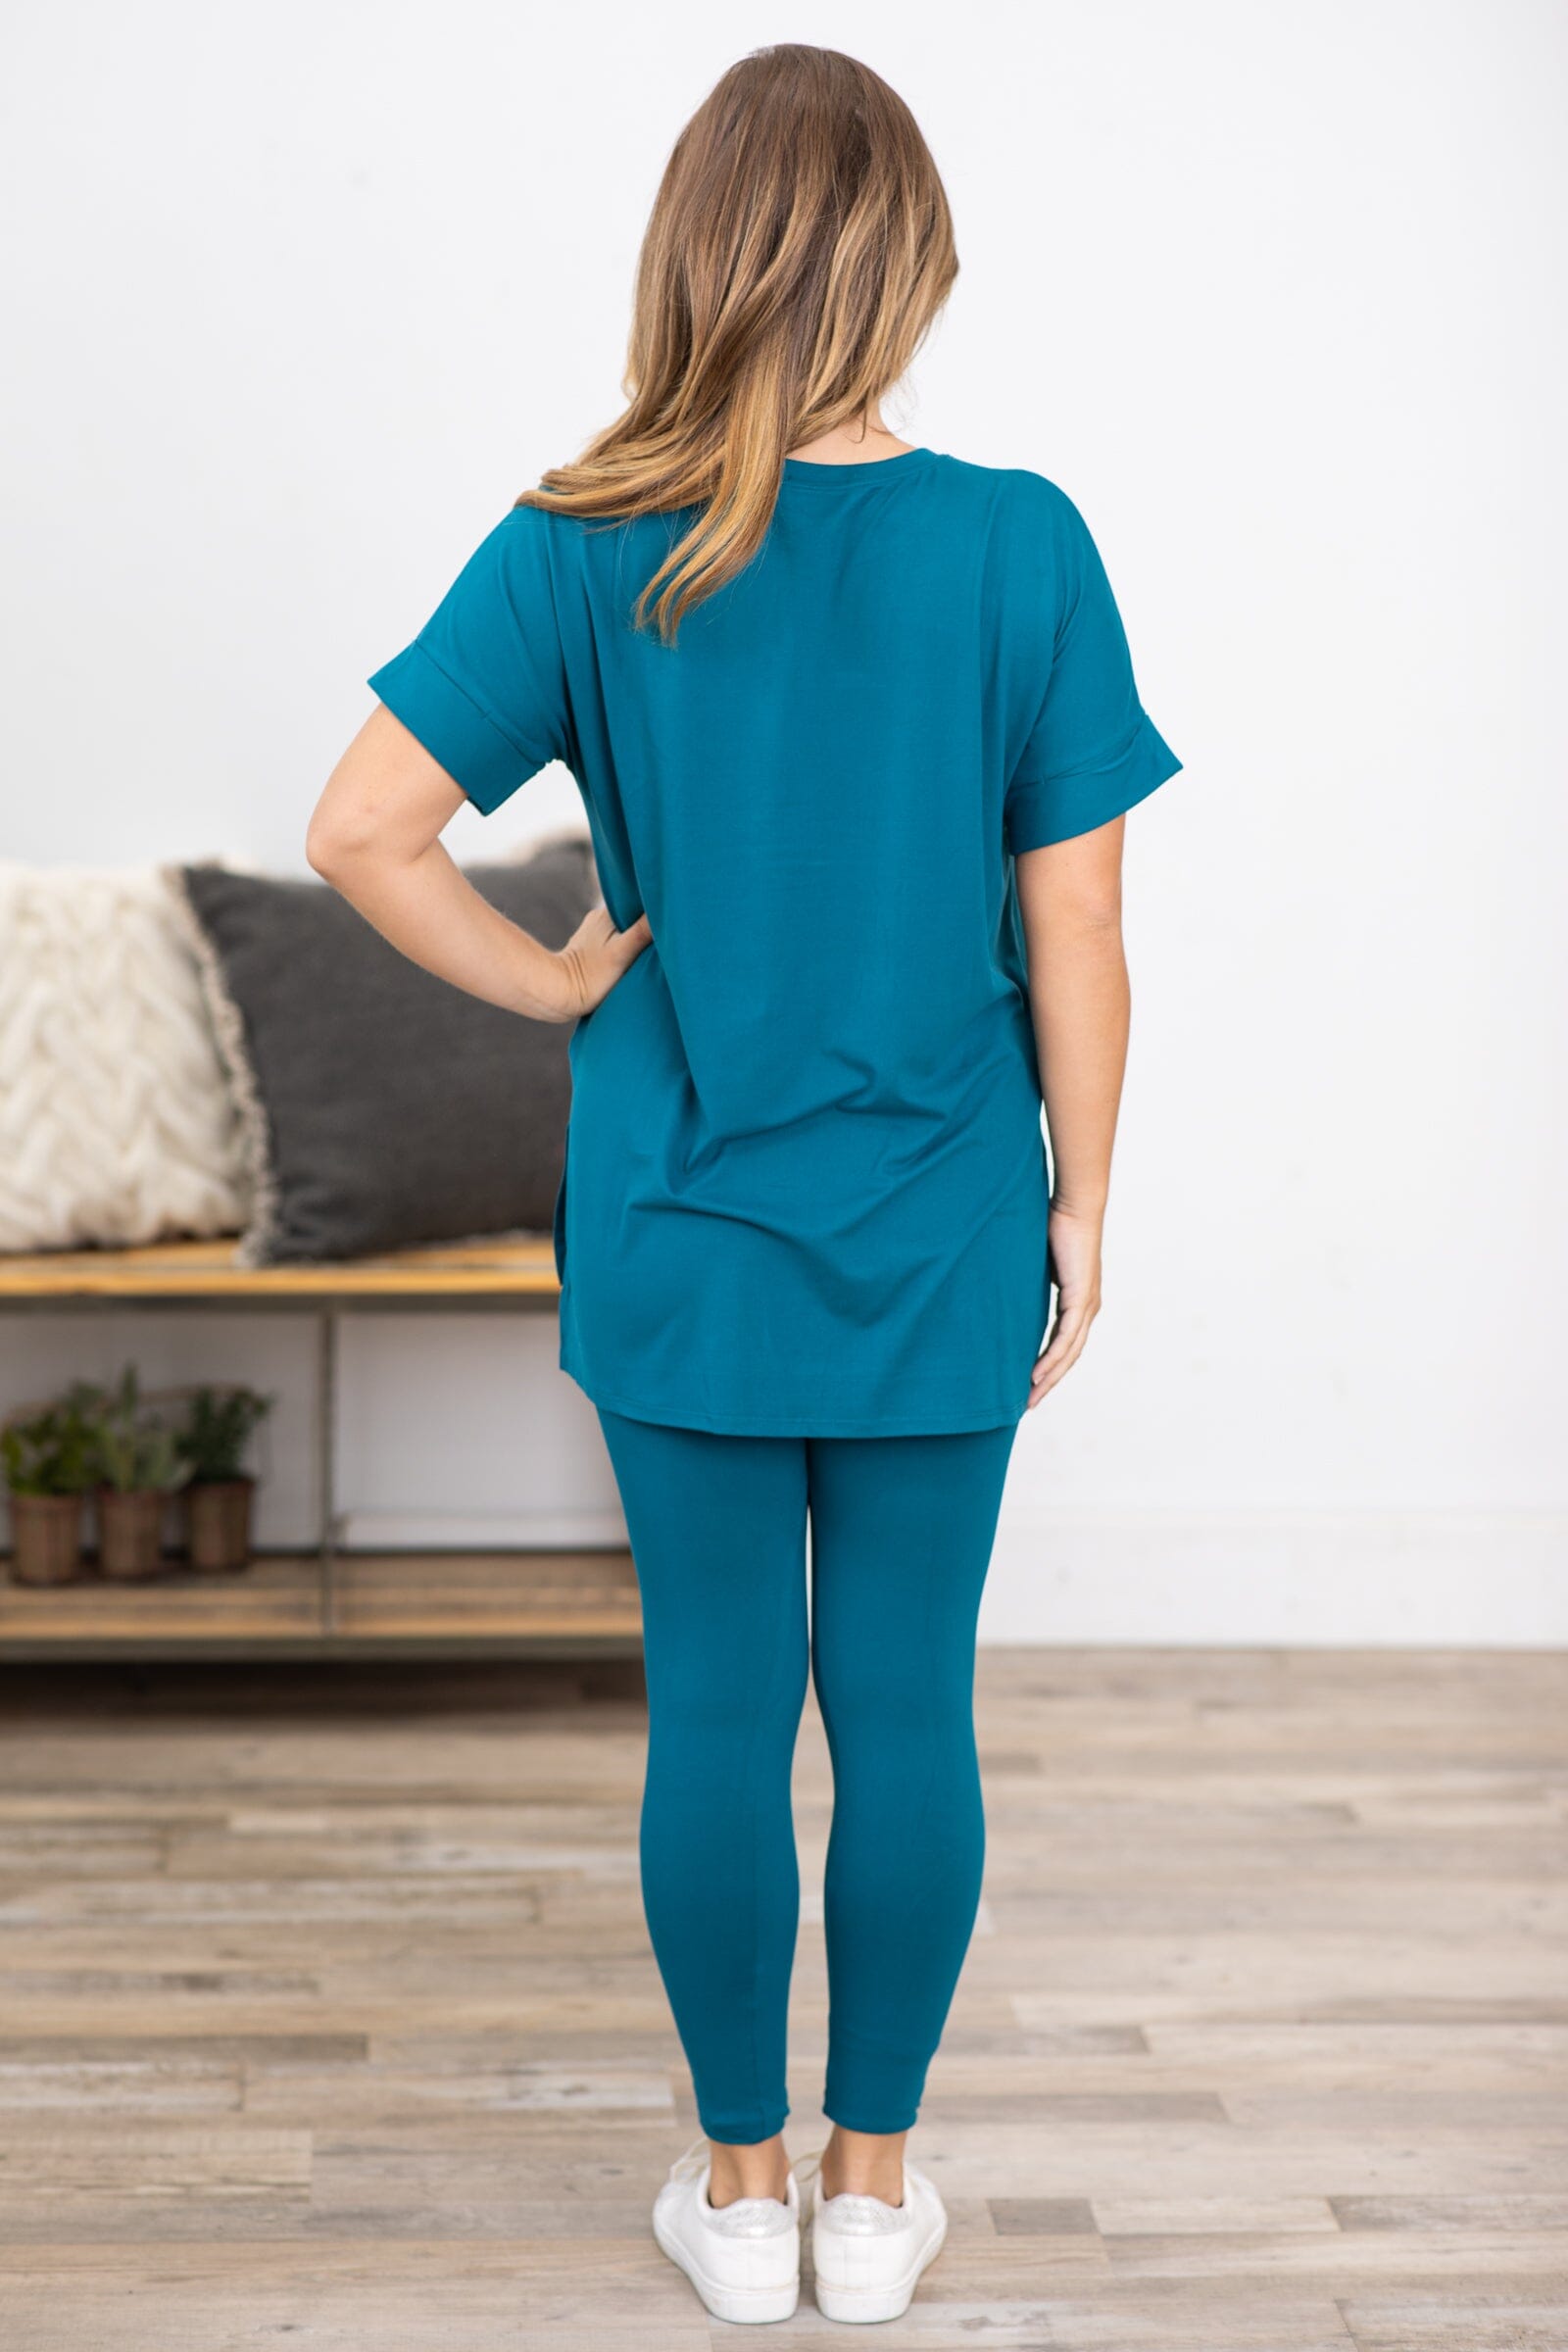 Teal Short Sleeve Top and Legging Set - Filly Flair